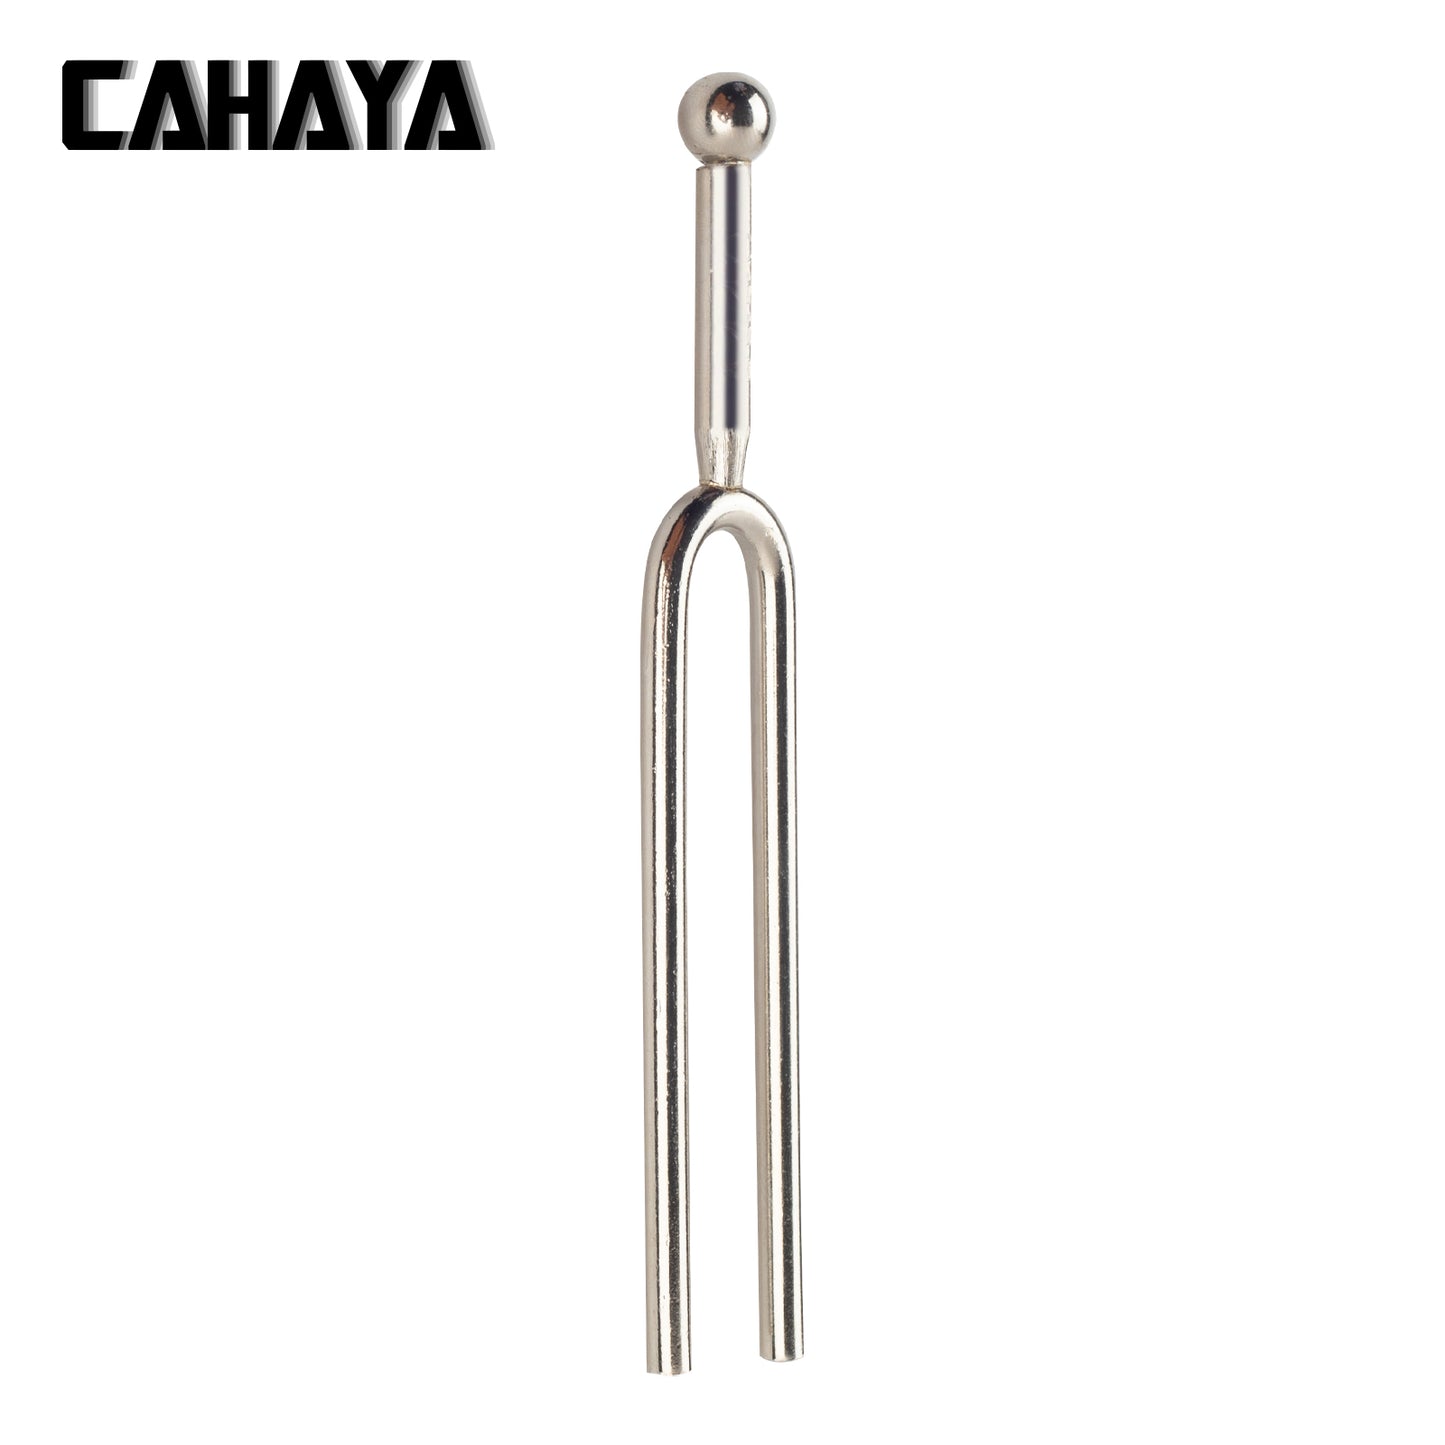 CAHAYA Tuning Fork for Musical Standard Instruments  Tuning Forks